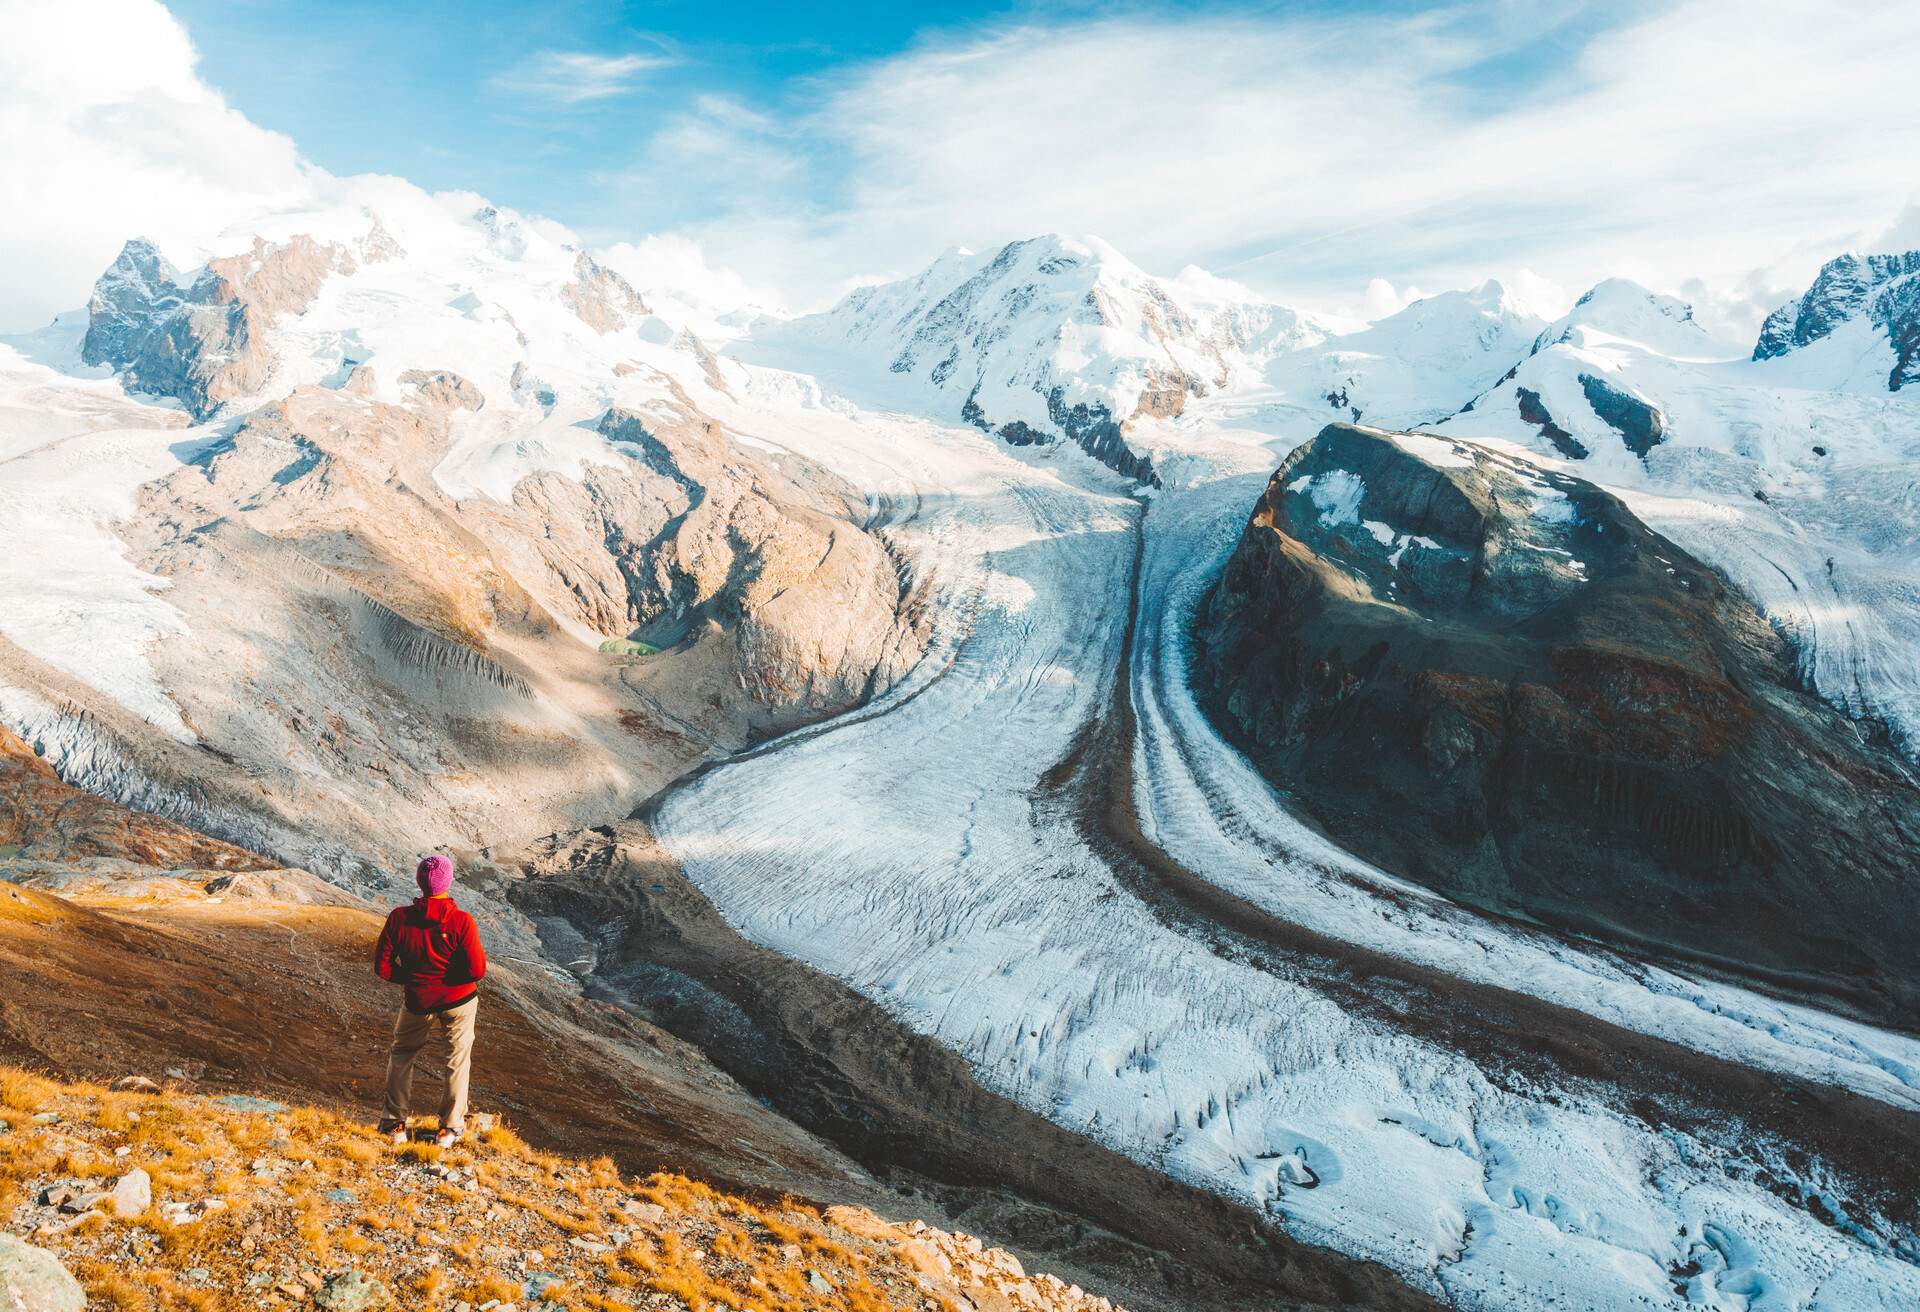 A hiker standing on a mountainside above a valley glacier looking towards distant snow-capped mountains.